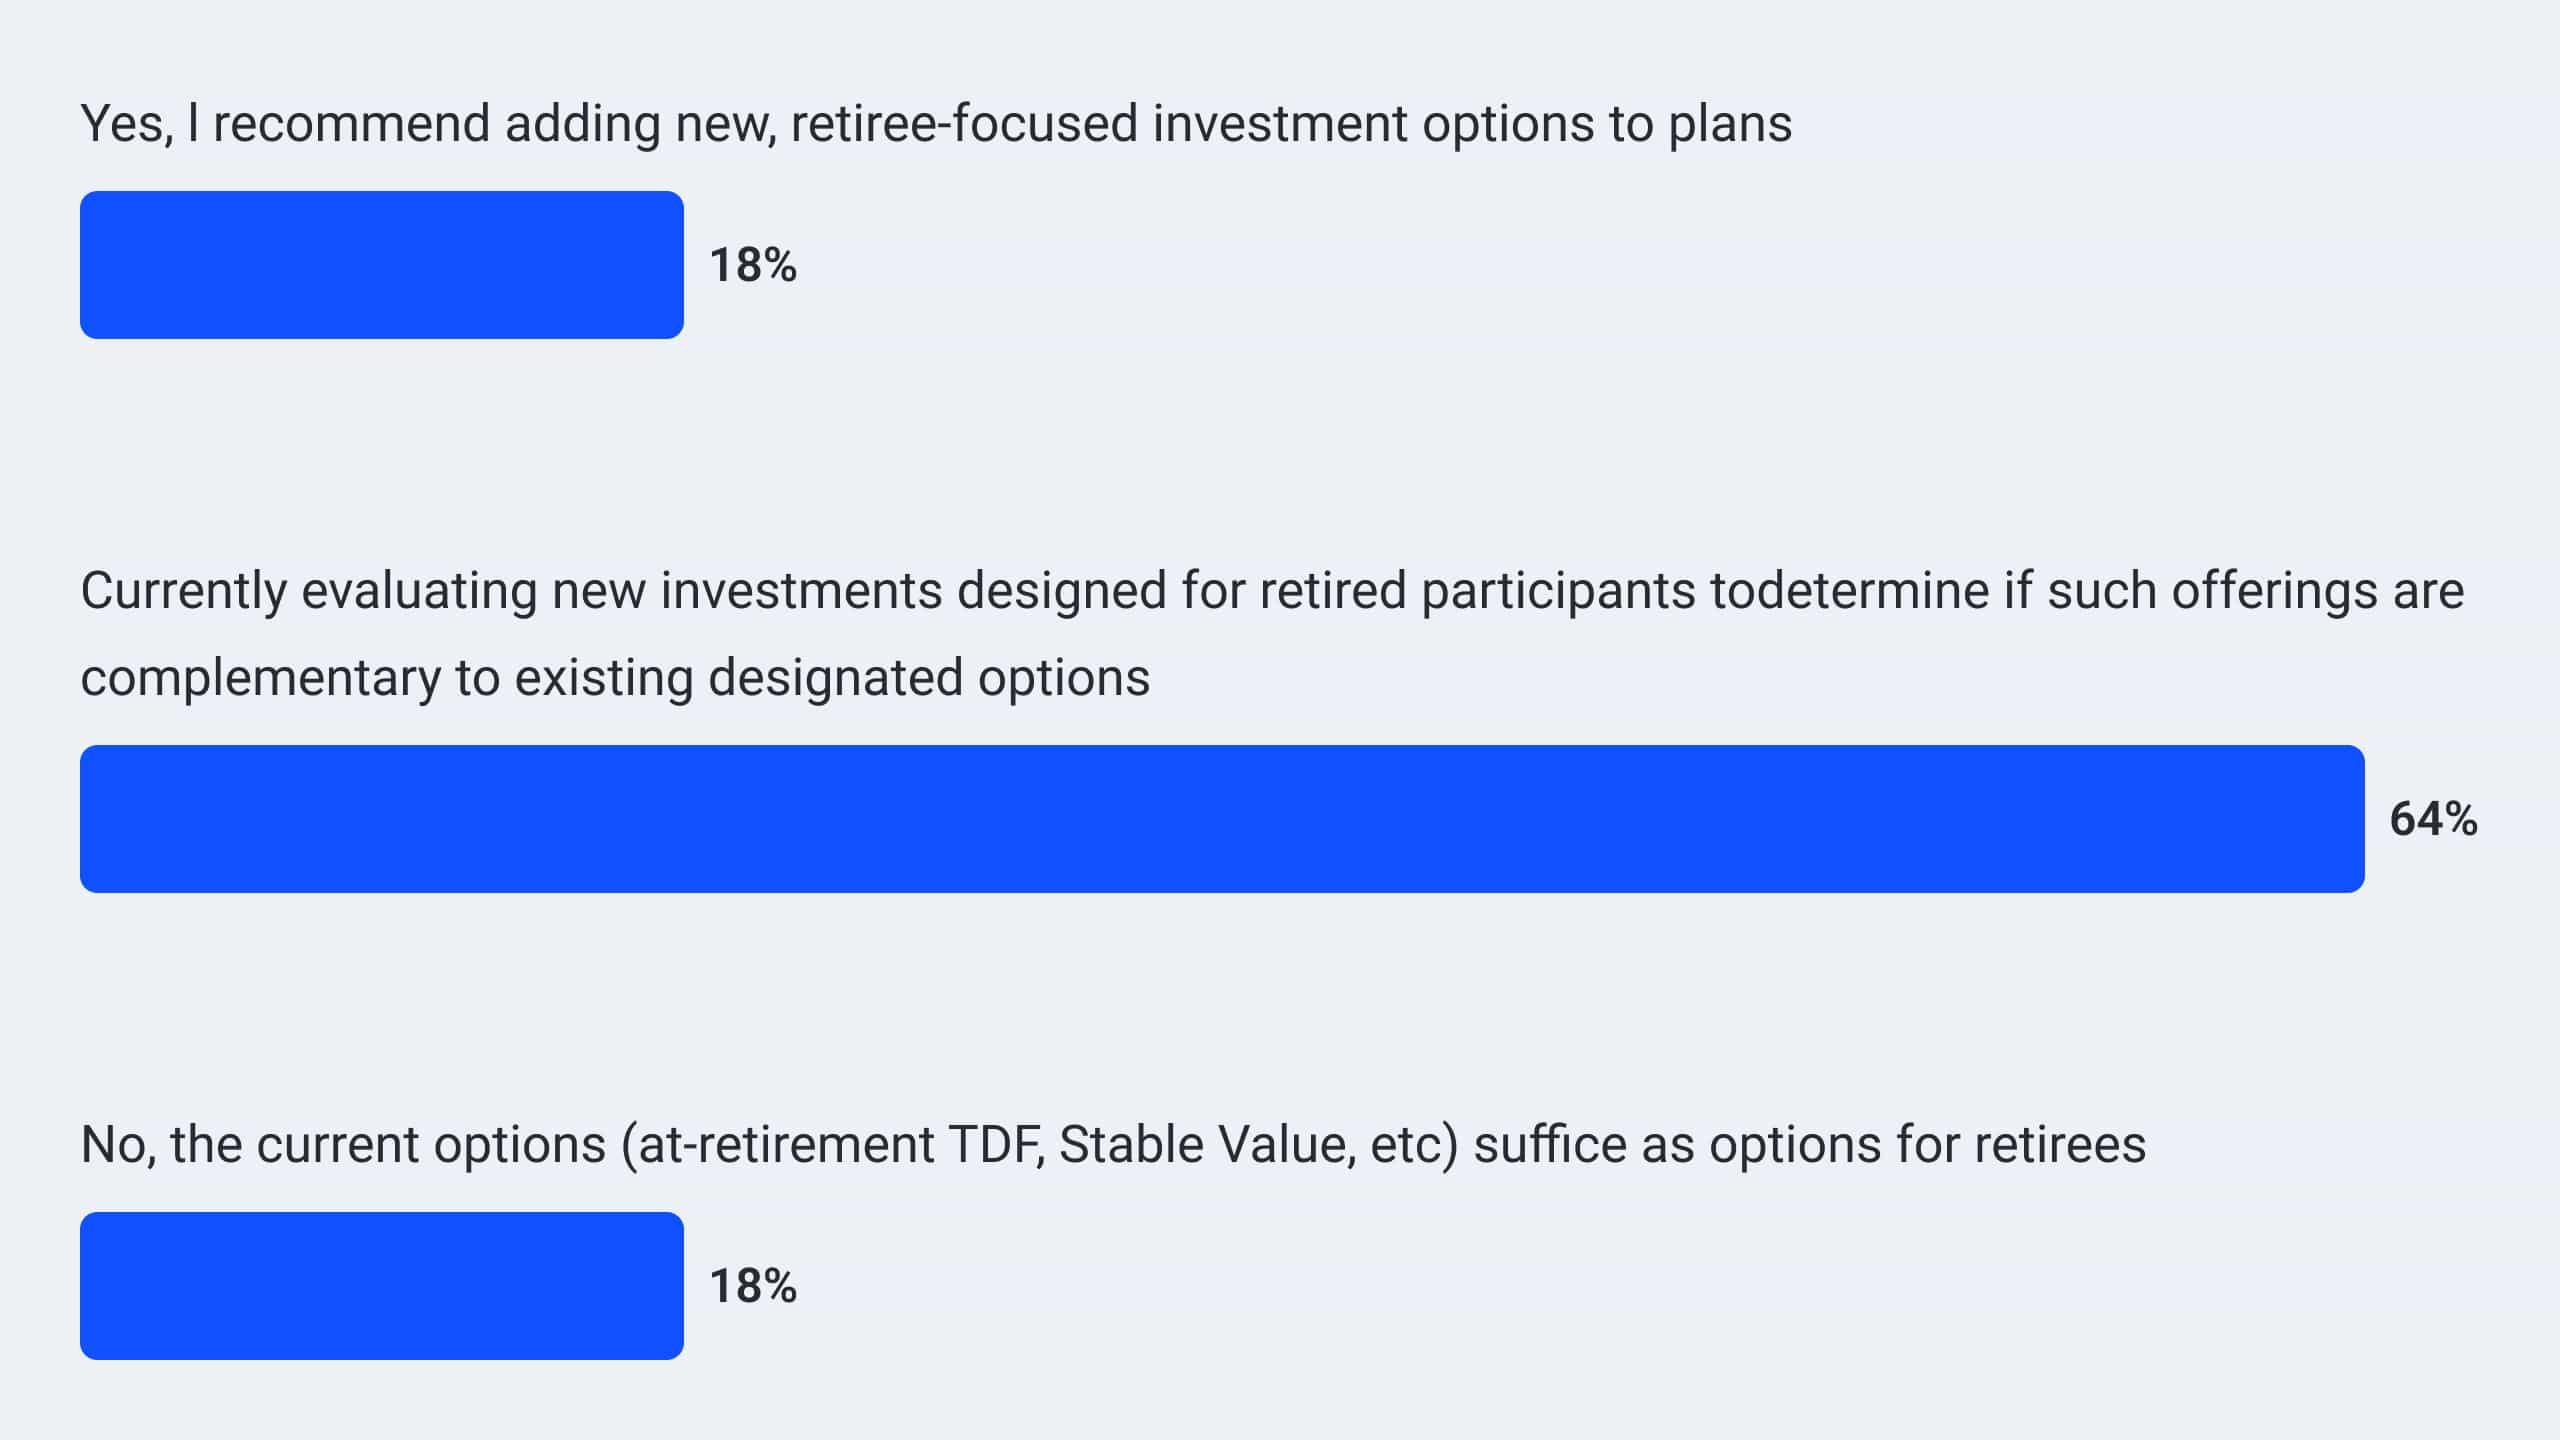 A bar chart shows the data from the answers to the following question: Do you recommend adding new plan investment options specifically to cater to retiree needs? (n=28). The answers are as follows: Yes, I recommend adding new, retiree-focused investment options to plans – 18%; Currently evaluating new investments designed for retired participants to determine if such offerings are complementary to existing designed options – 64%; No, the current options (at-retirement TDF, Stable Value, etc.) sufficed as good options for retirees – 18%.